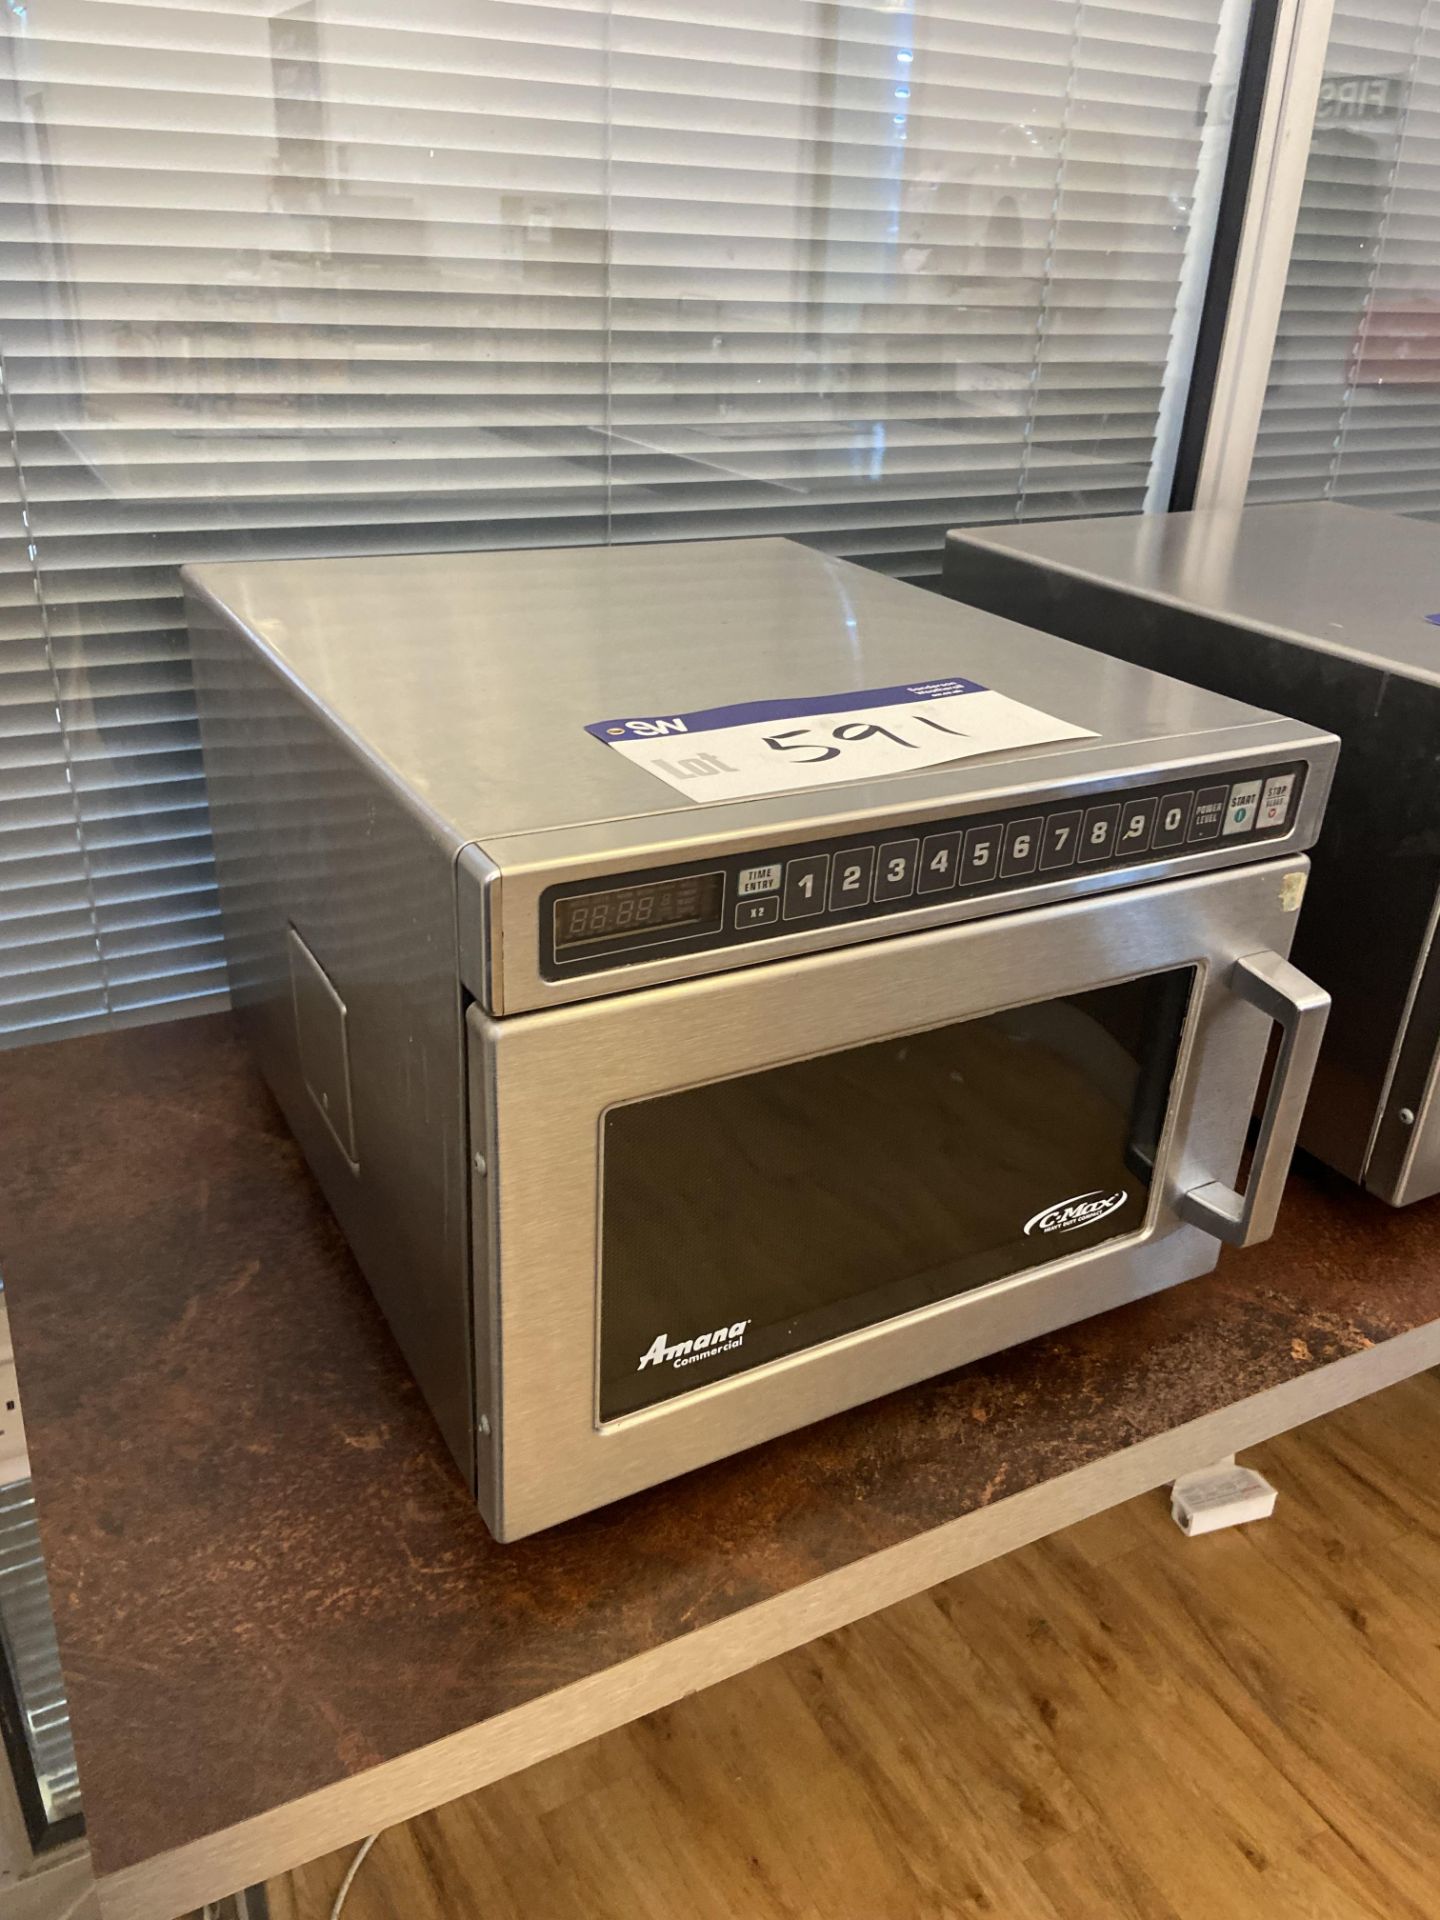 Amama Commercial C-Max Heavy Duty Compact Stainless Steel Microwave Oven Please read the following